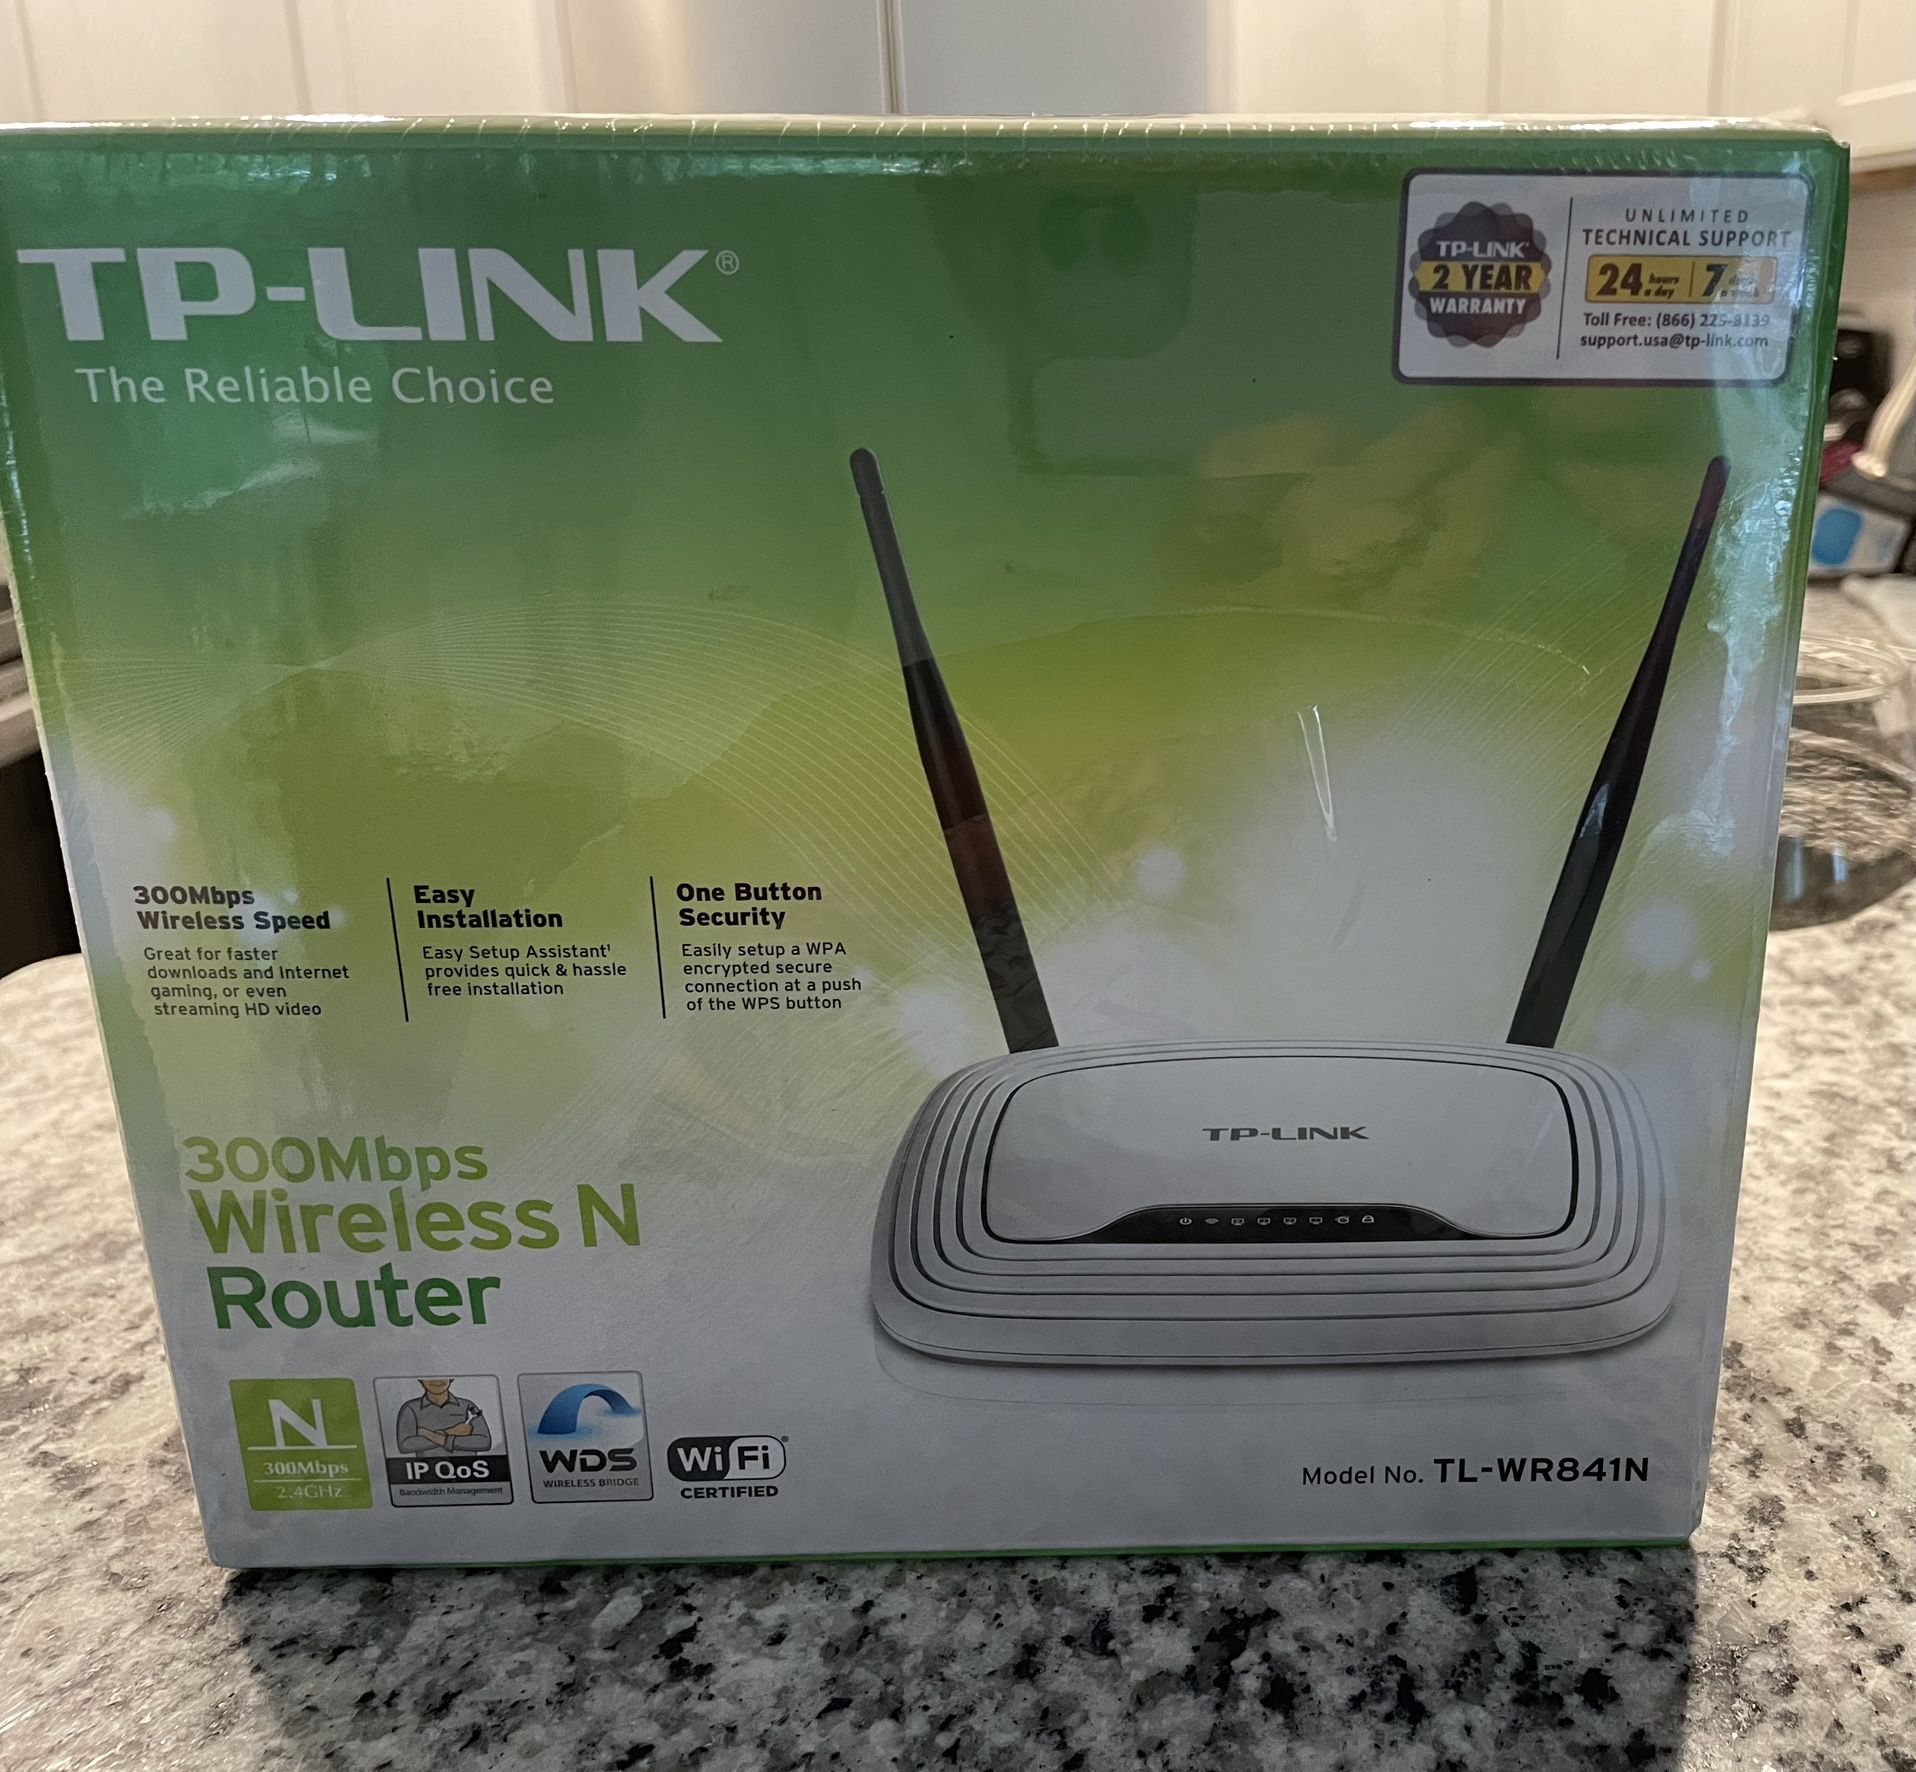 TP-Link TL-WR841N 2.4GHz N300 300Mbps Wireless N WiFi Router NEW IN BOX